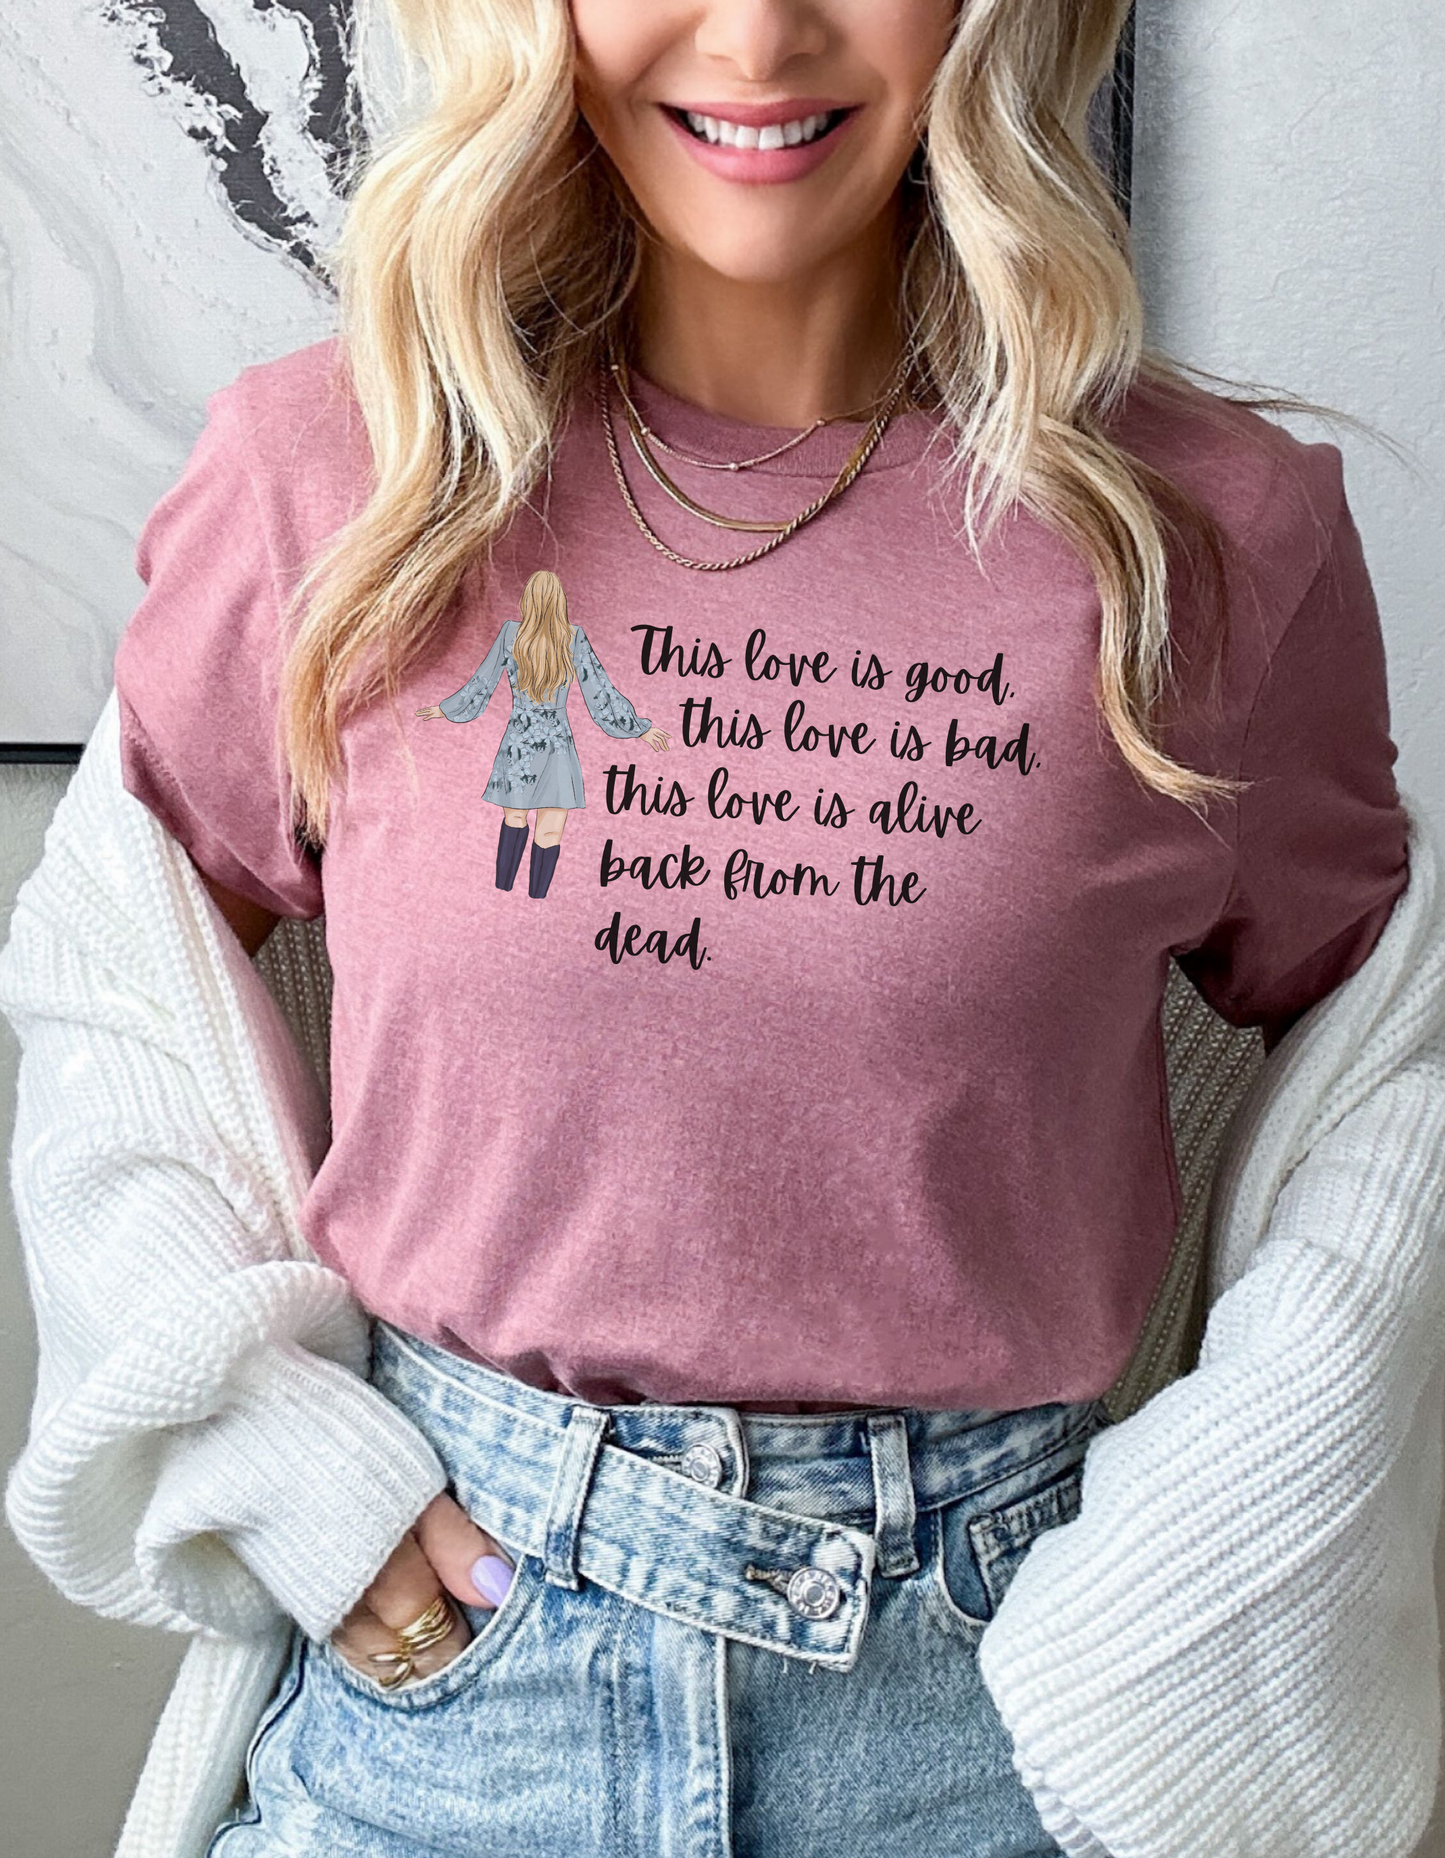 Taylor Swift Preppy Picture T-Shirt - This Love Is Good, This Love Is Bad